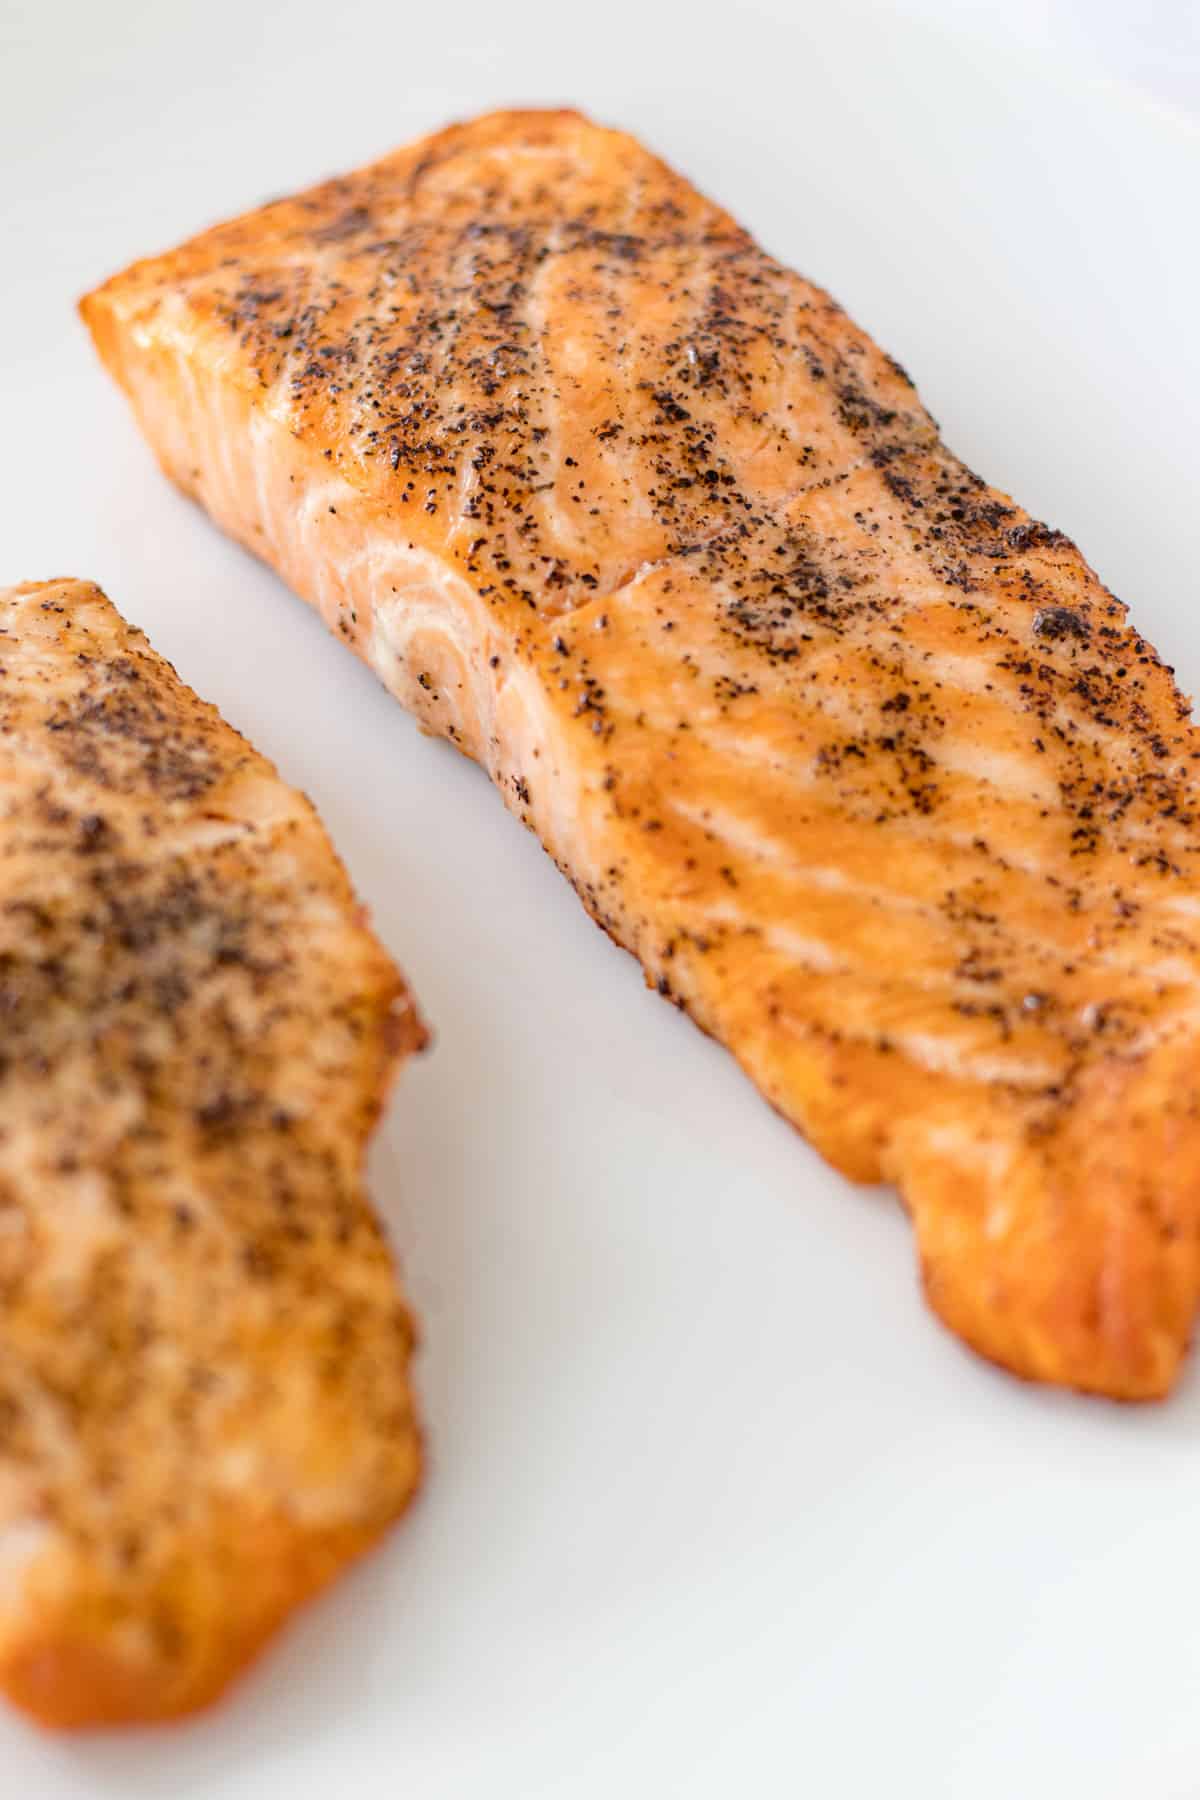 salmon filets close up after they have been cooked showing the crispy edges